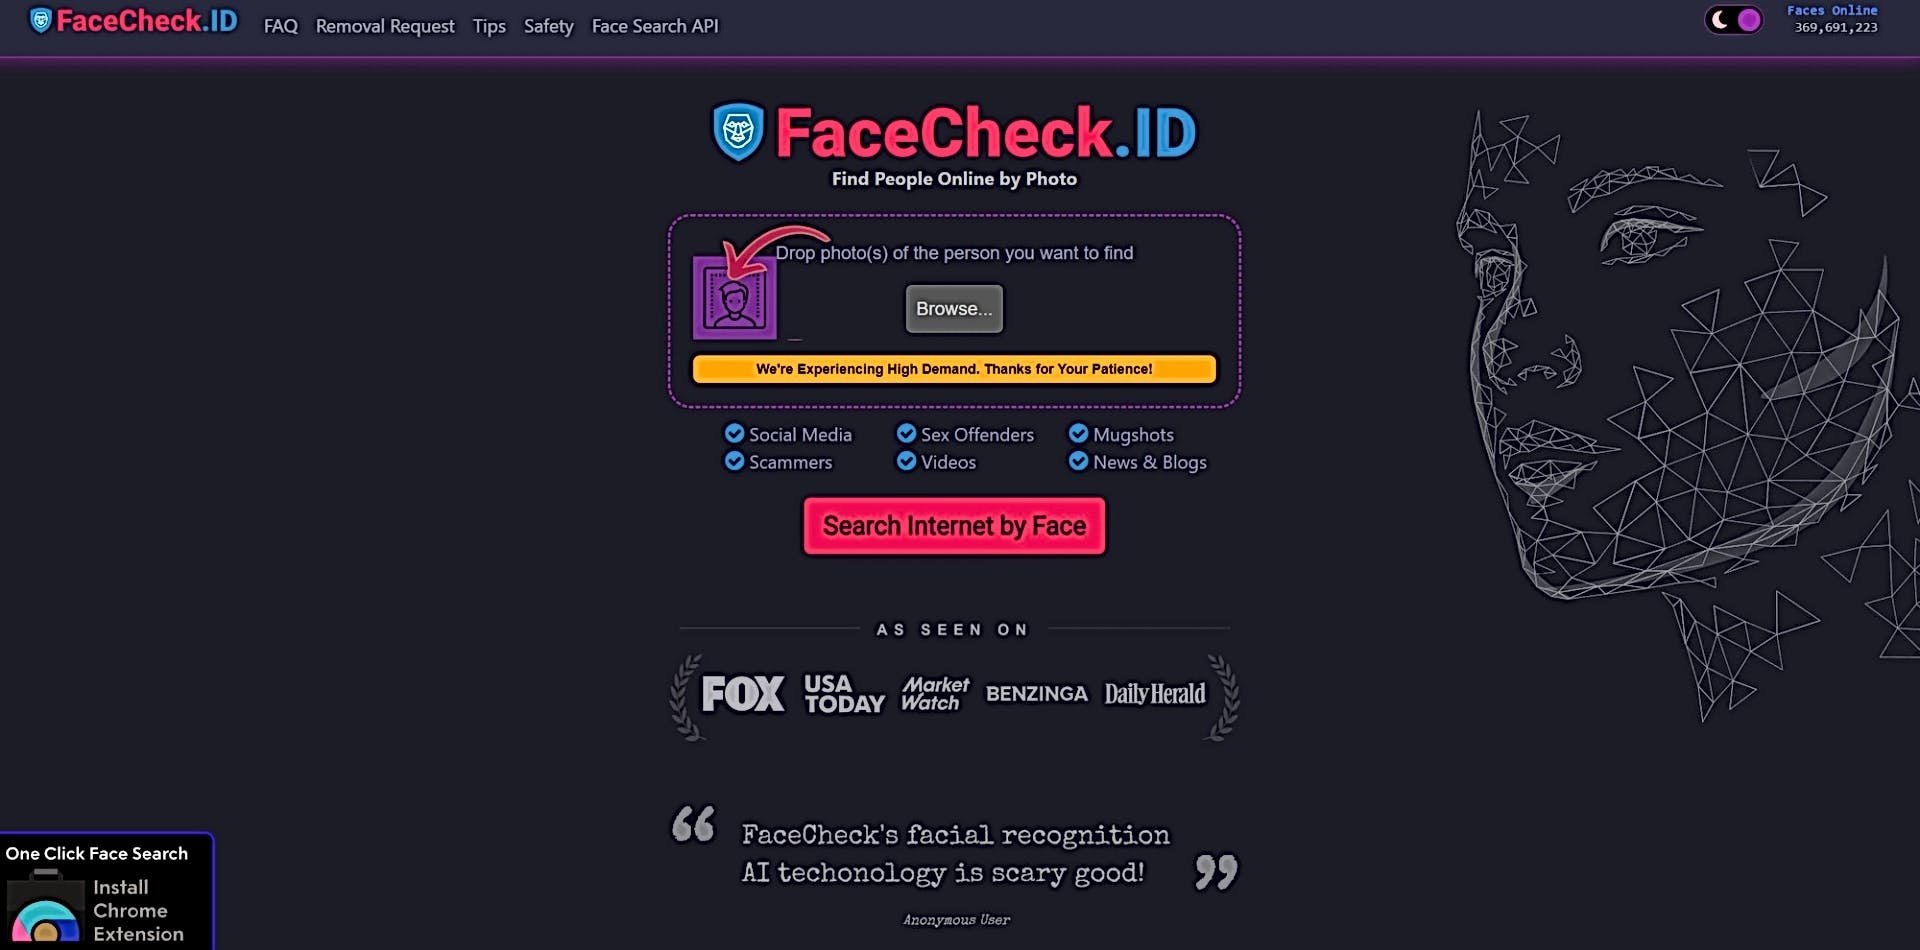 FaceCheck ID featured